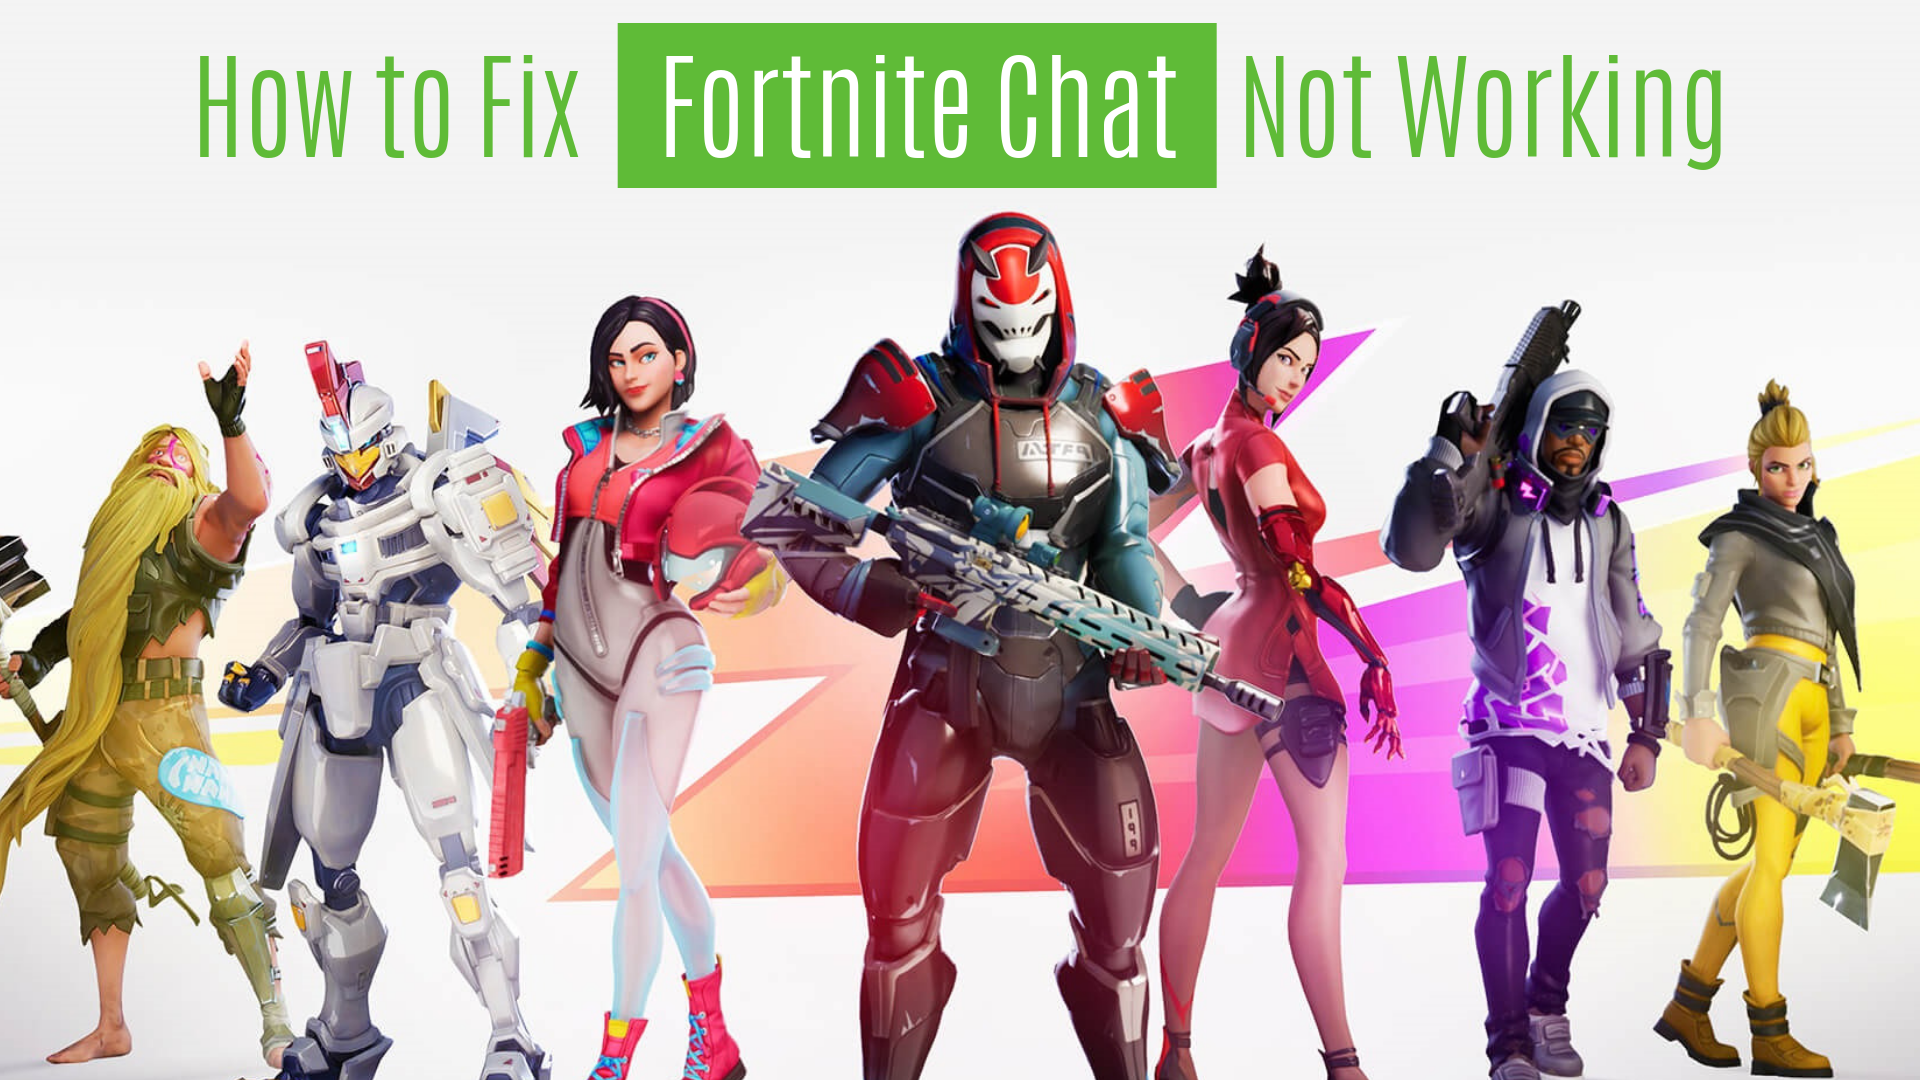 Fortnite Chat Not Working